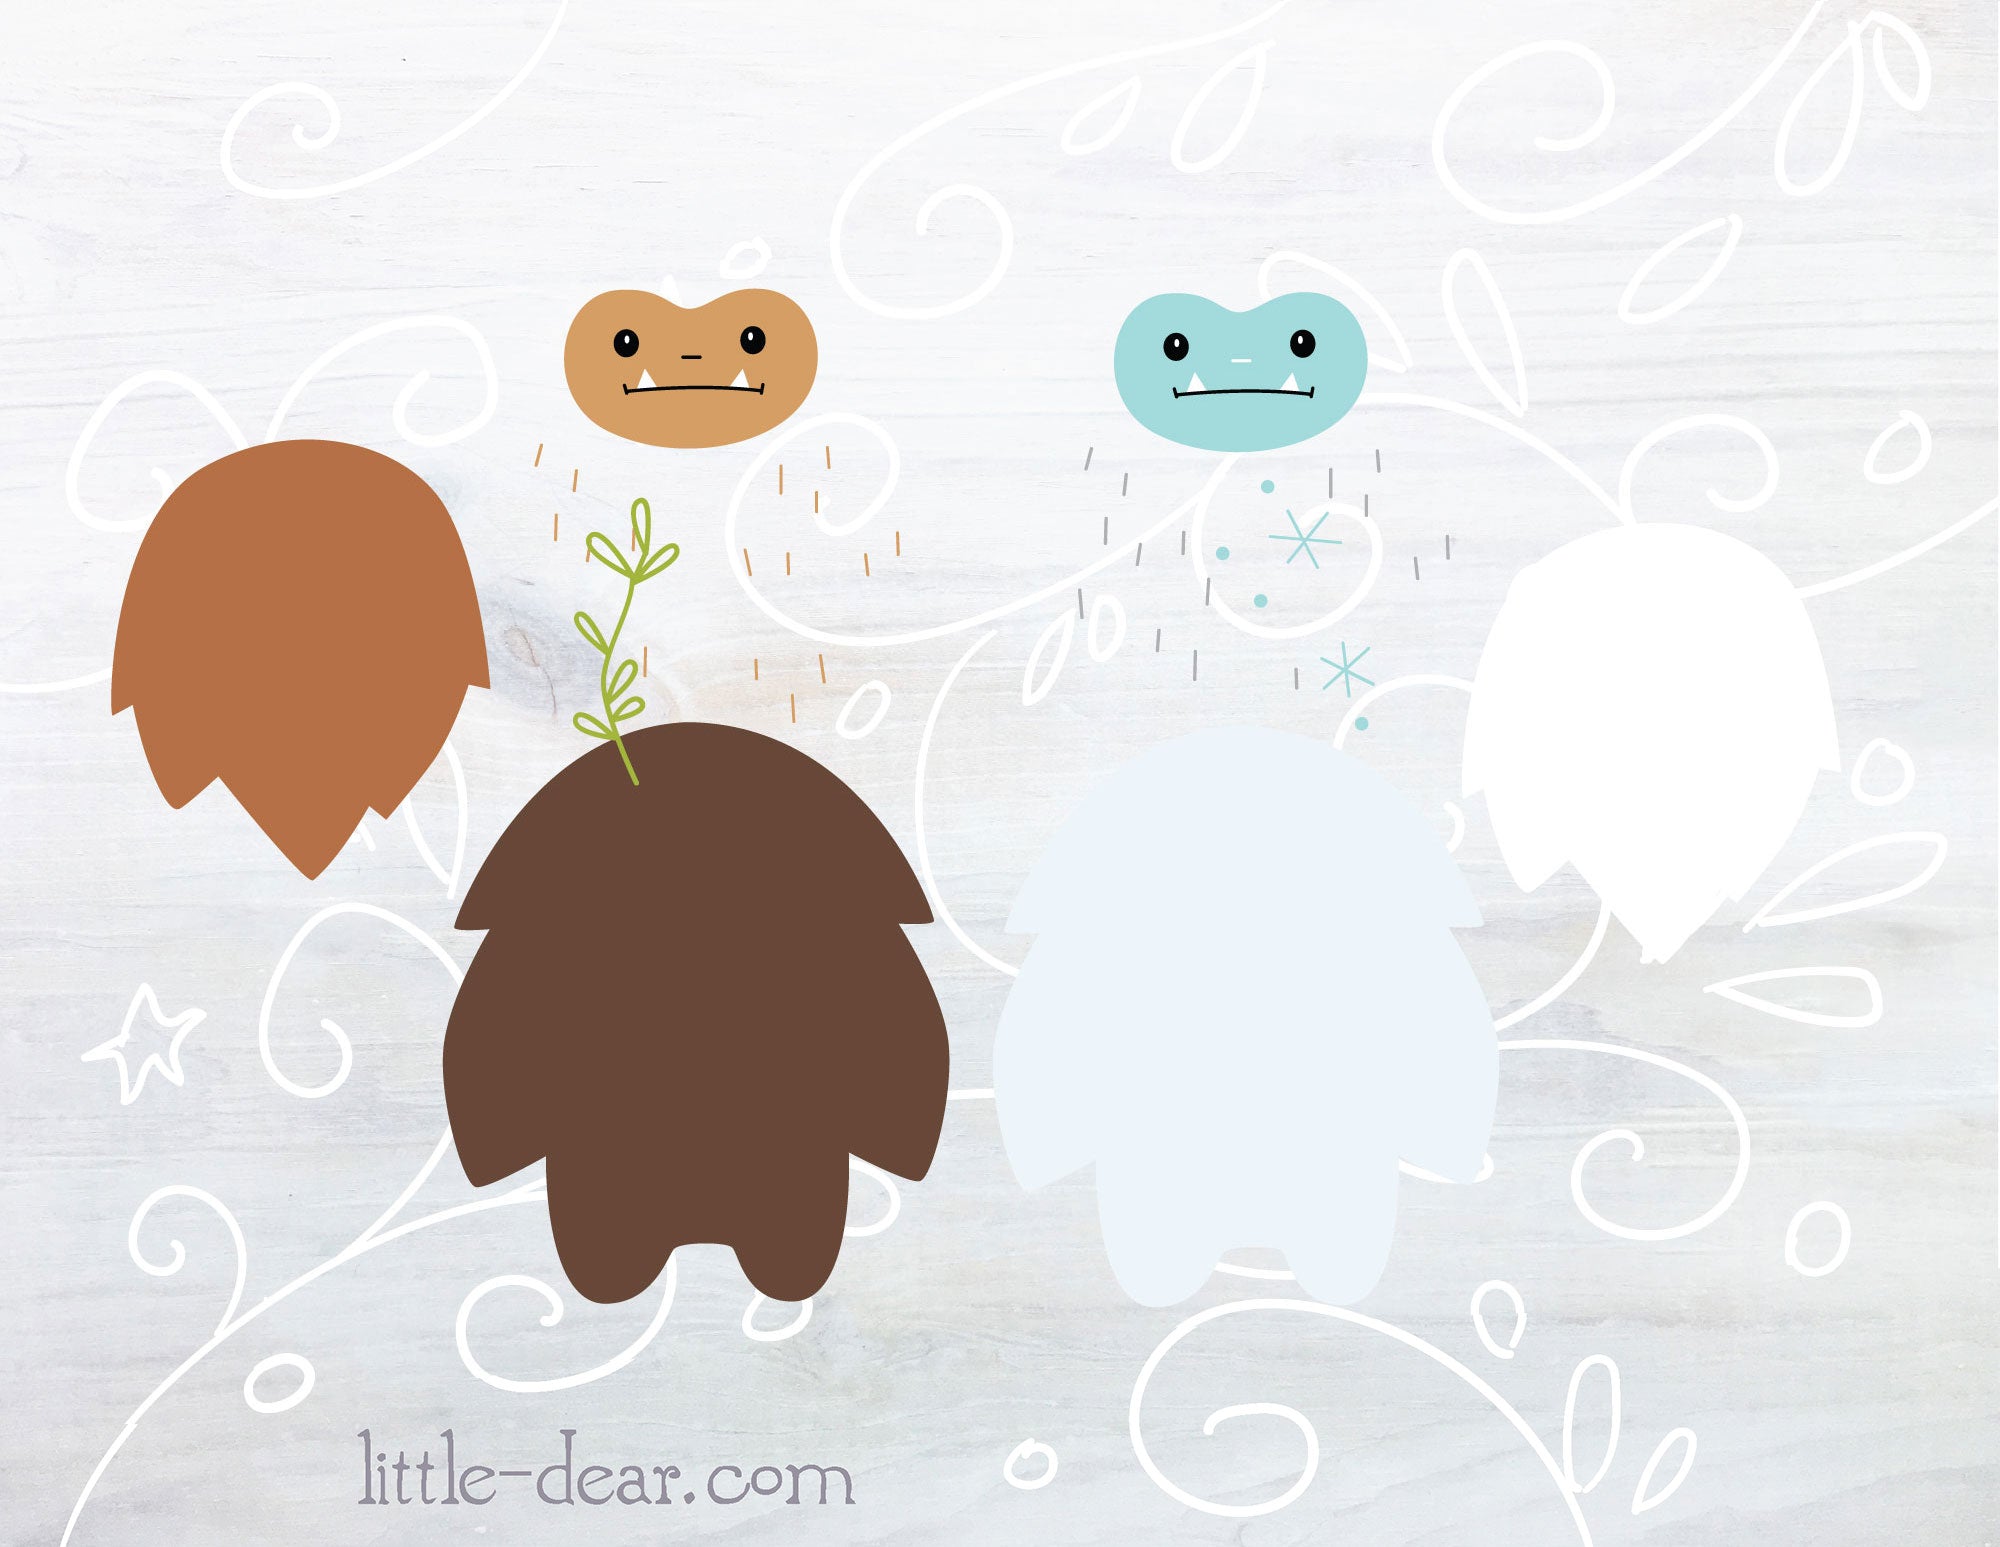 Cute baby Yeti. SVG, PNG, EPS. Cut file. (2884135)